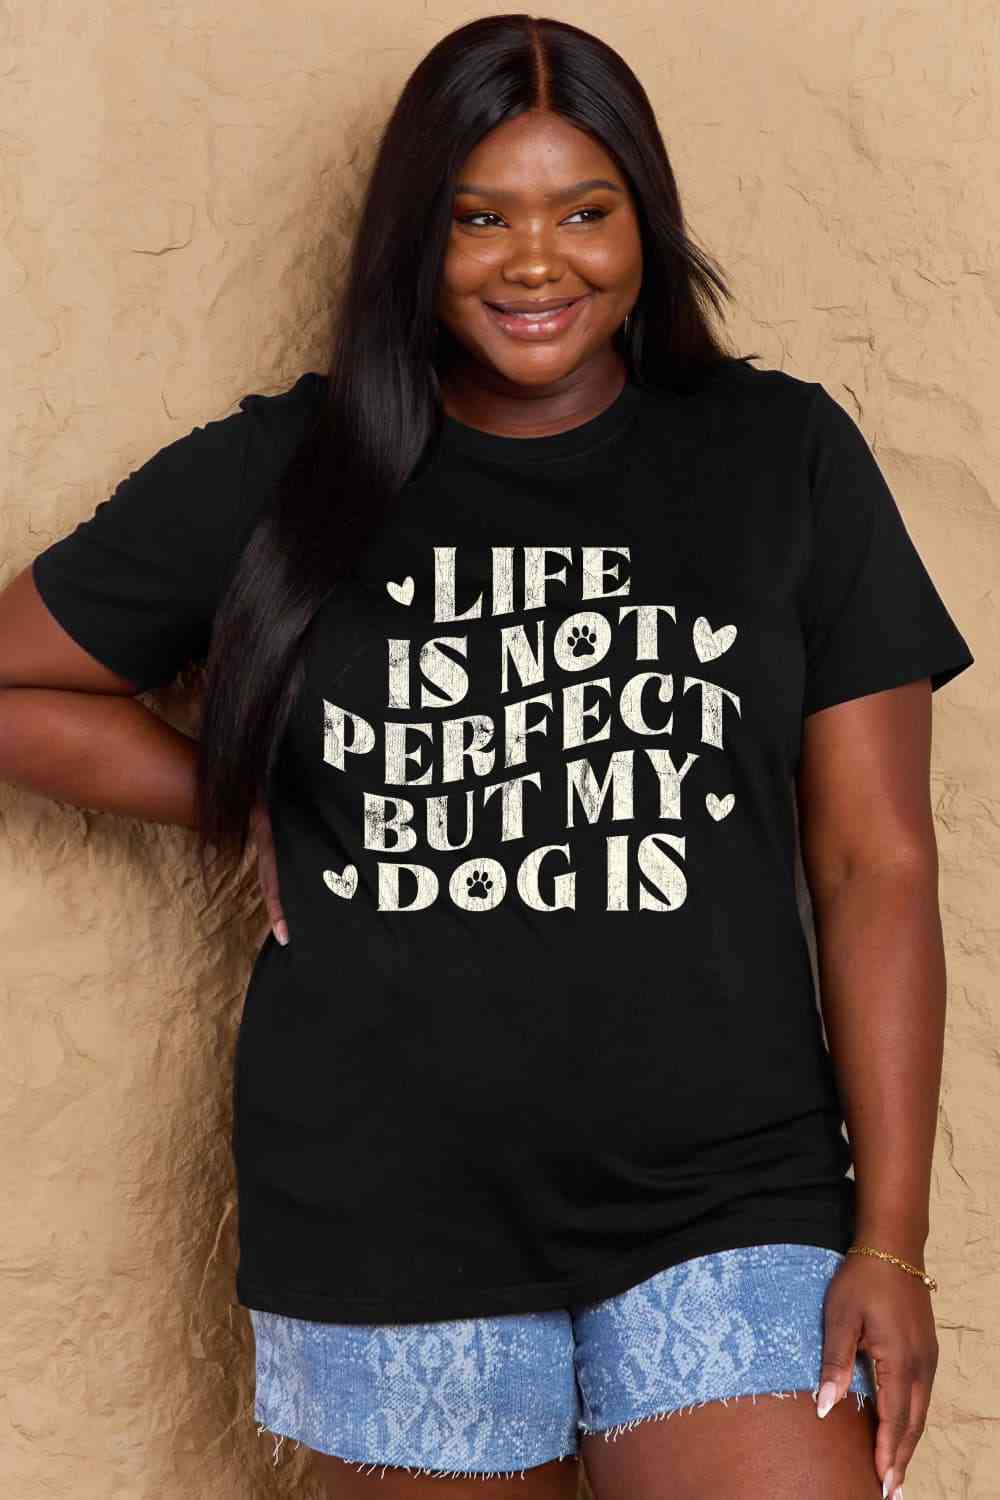 My Dog is Perfect T-Shirt